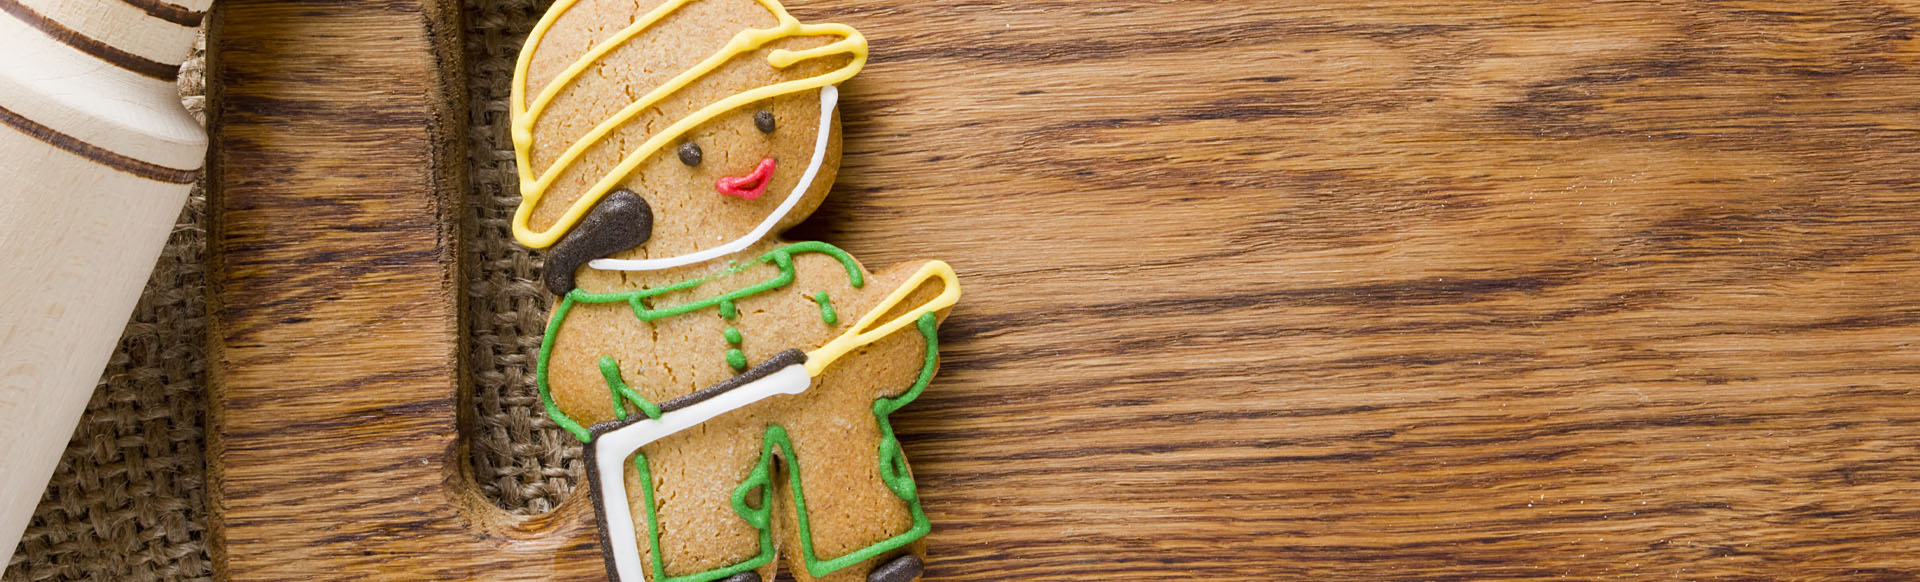 Image showing a gingerbread man made to look like a firefighter